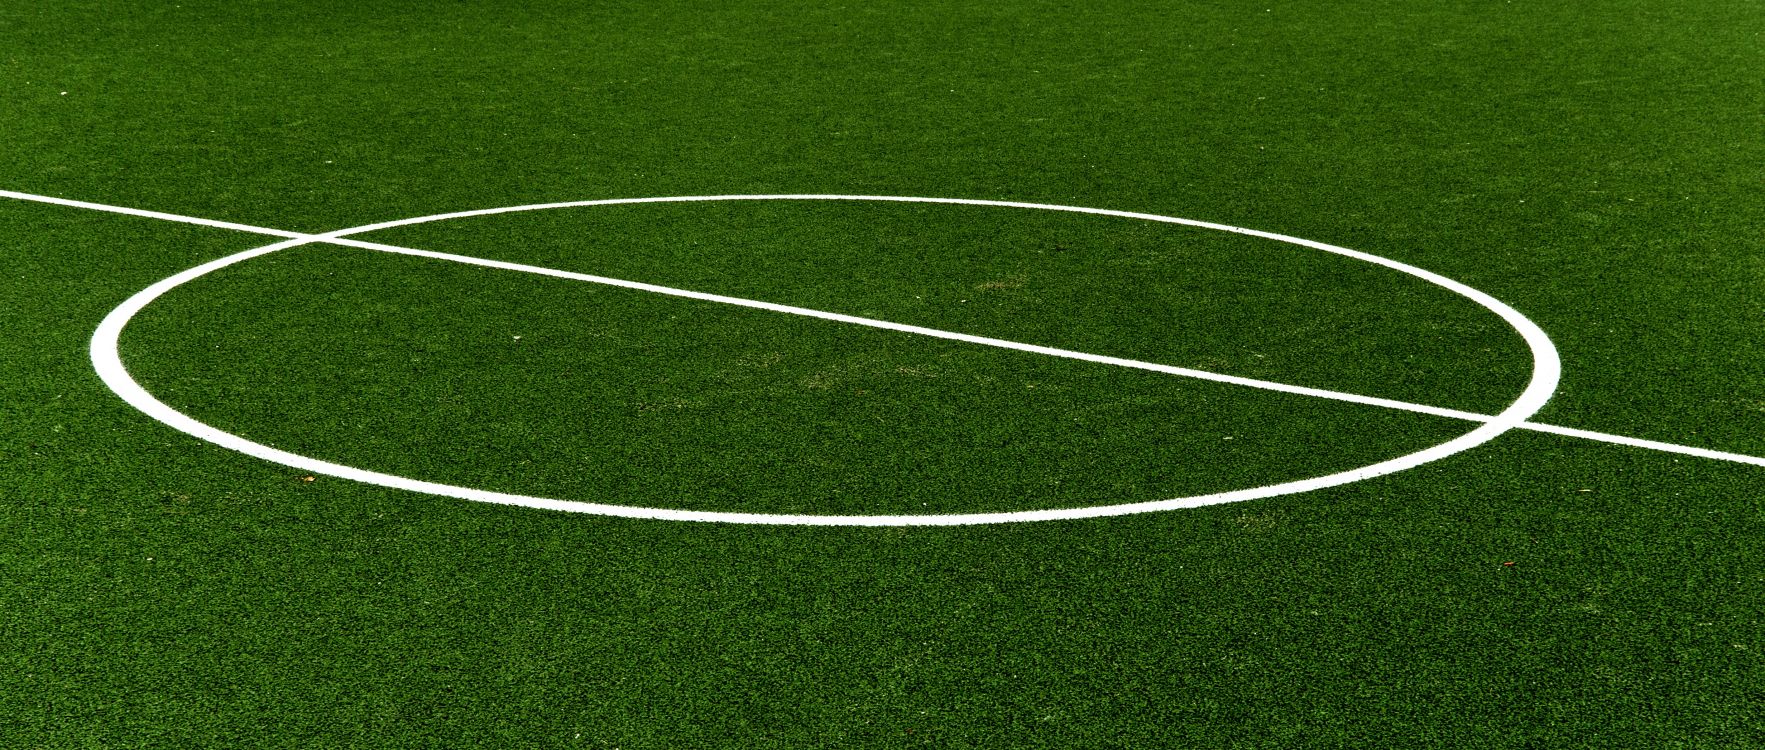 Green and White Soccer Field. Wallpaper in 4928x2094 Resolution